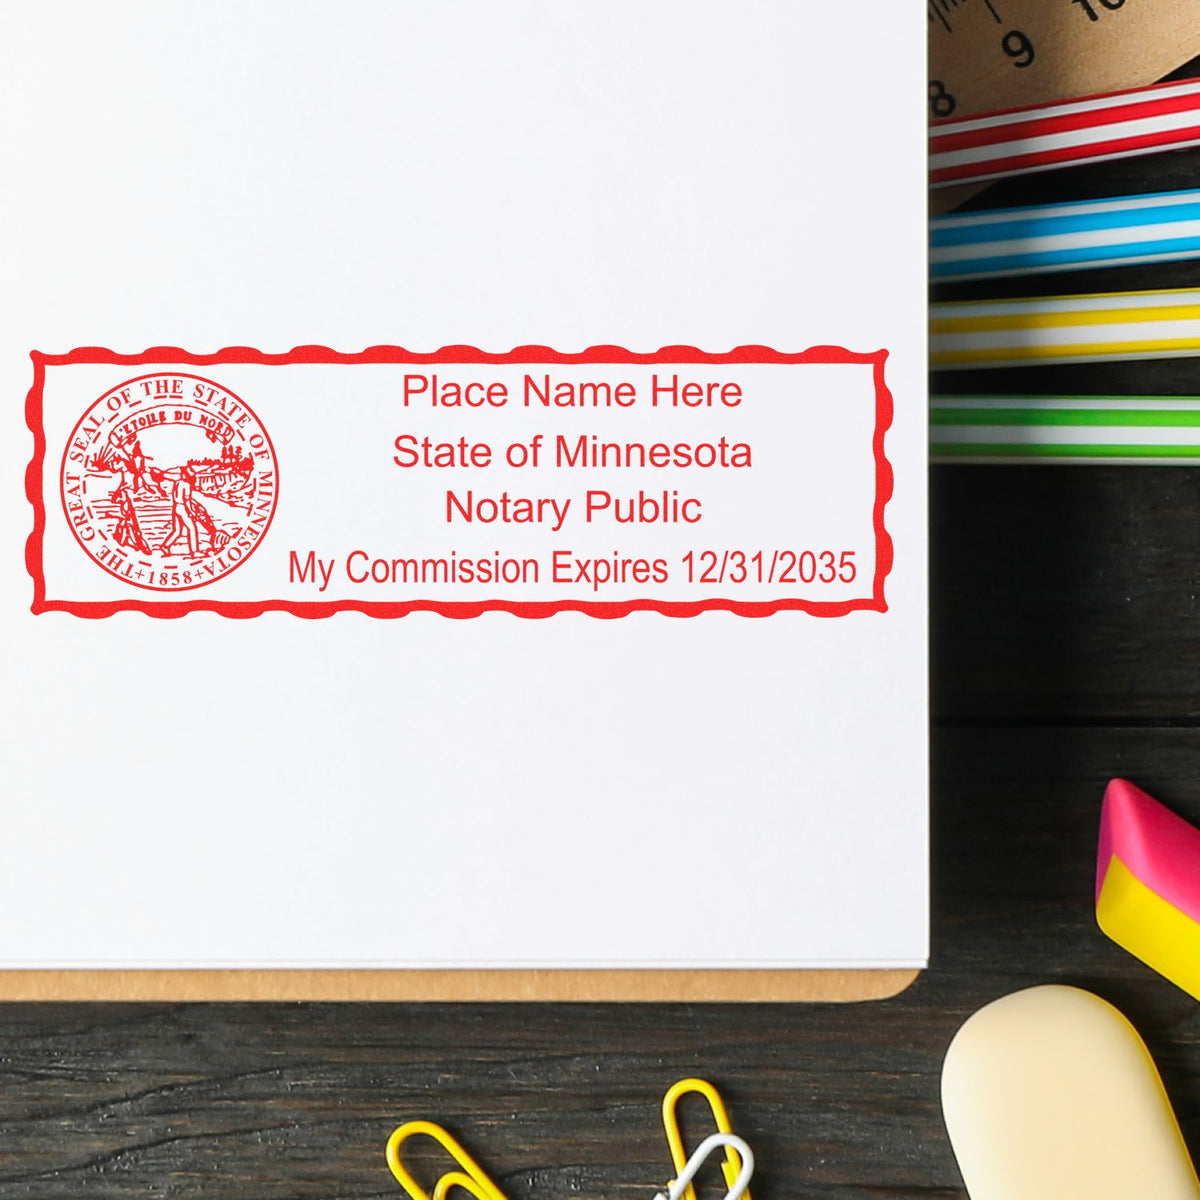 A stamped impression of the PSI Minnesota Notary Stamp in this stylish lifestyle photo, setting the tone for a unique and personalized product.